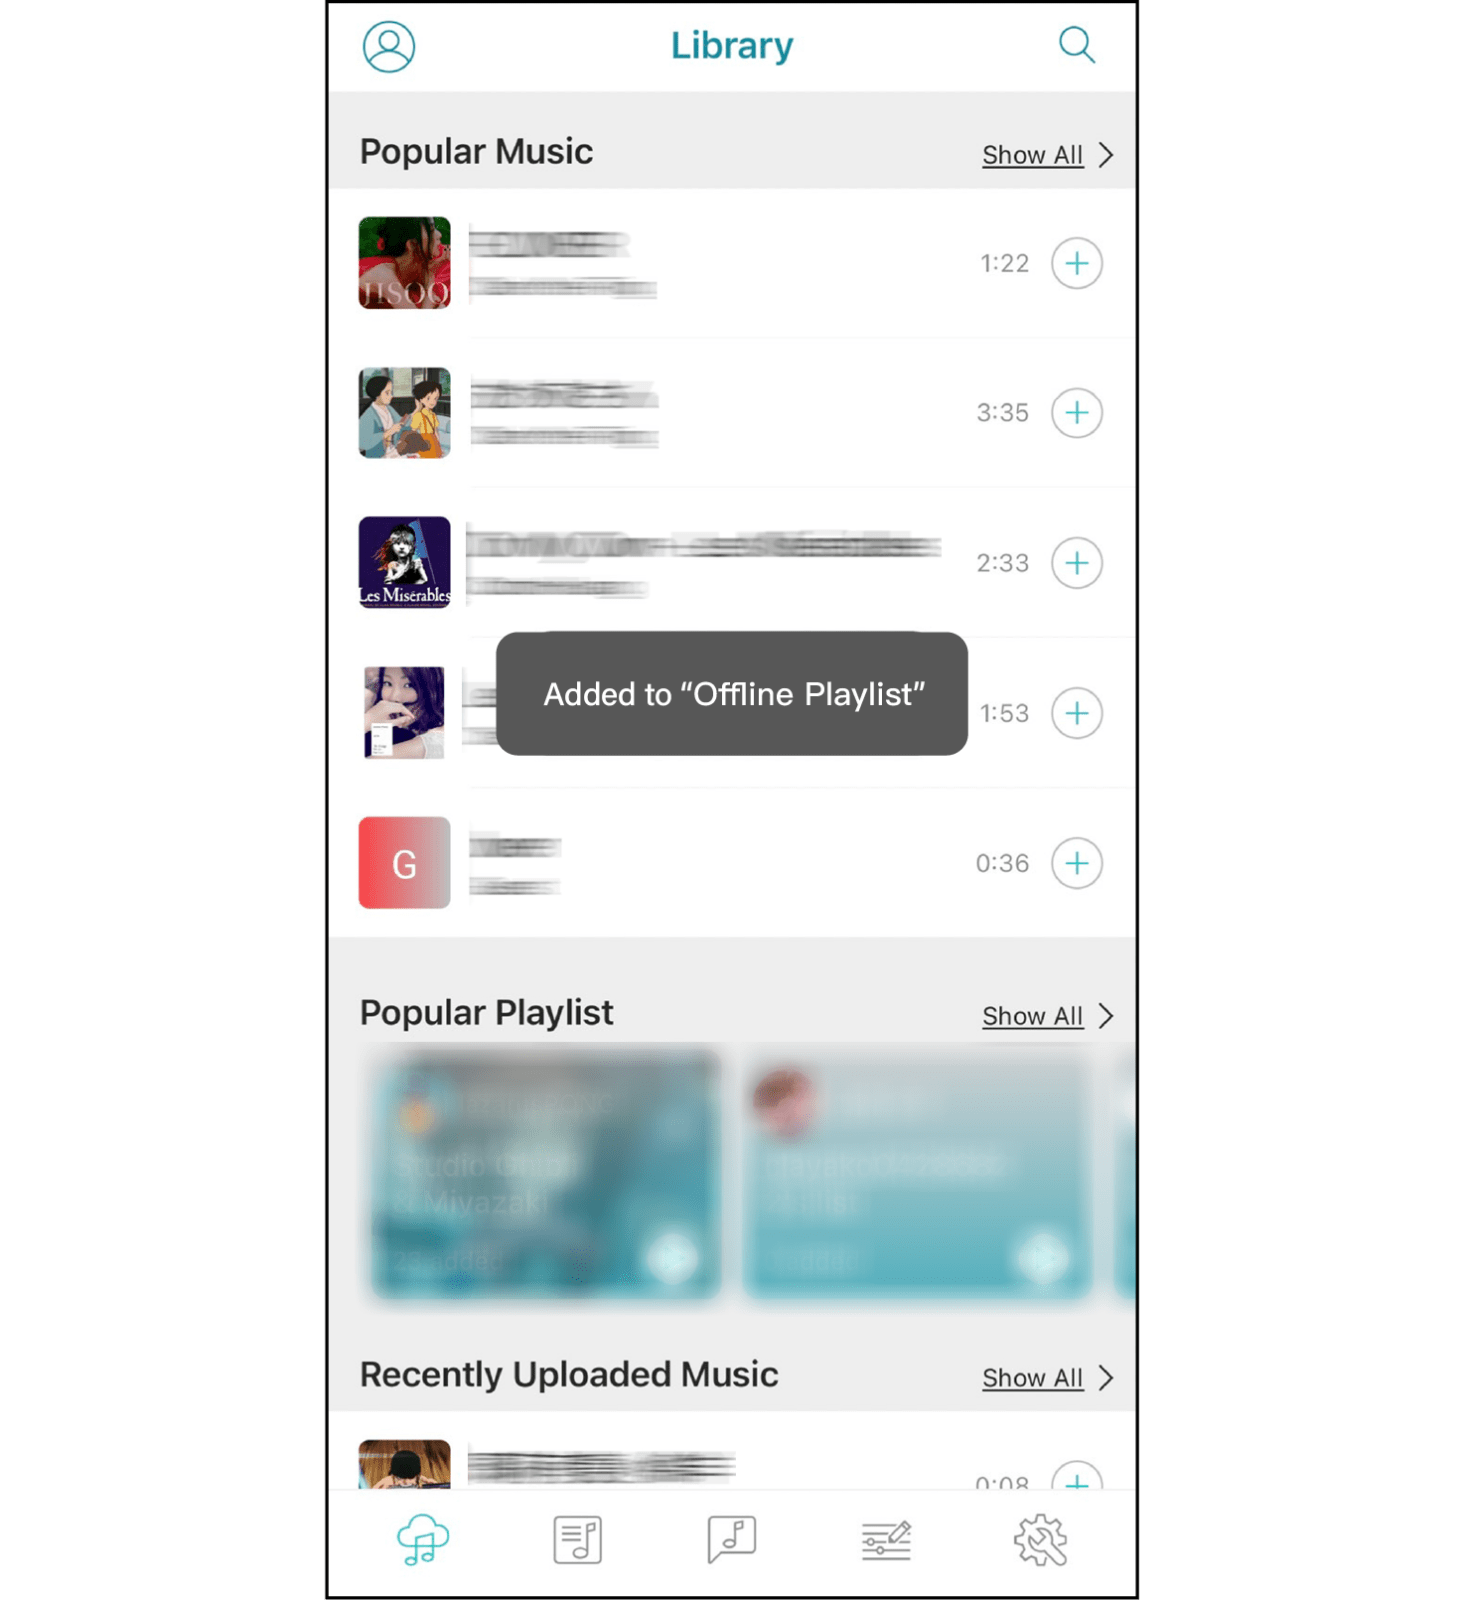 3.Complet Adding MusicAfter you successfully add this melody into the offline playlist, the app screen will show a notification “Added to Offline Playlist” for a short time.